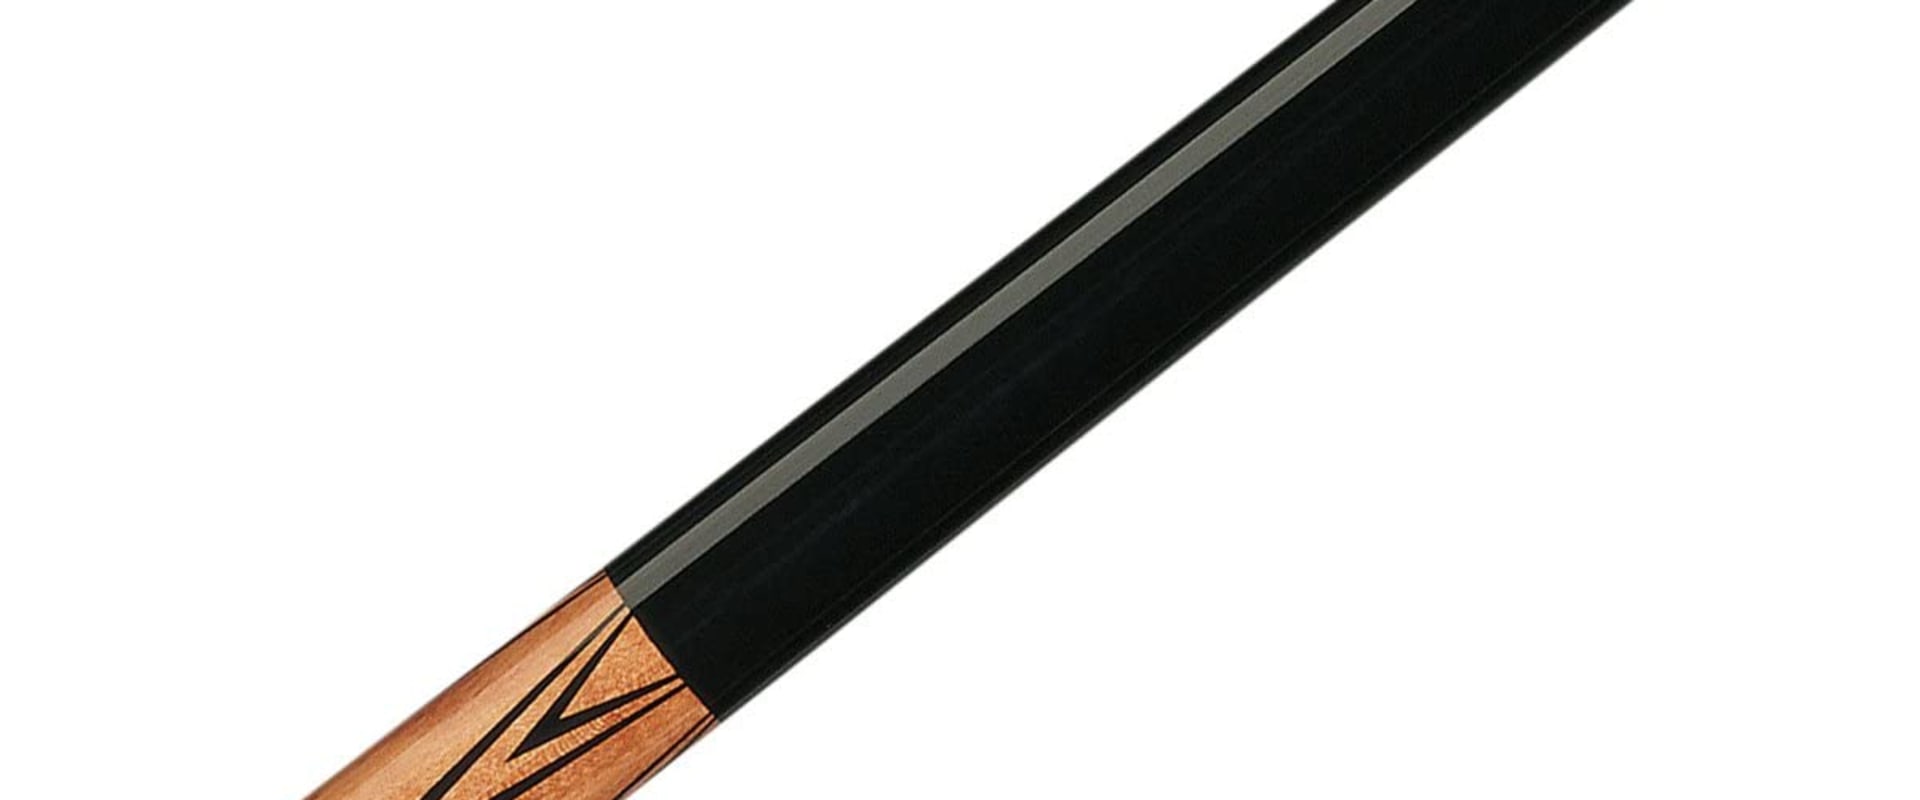 What is the best pool cue to buy?